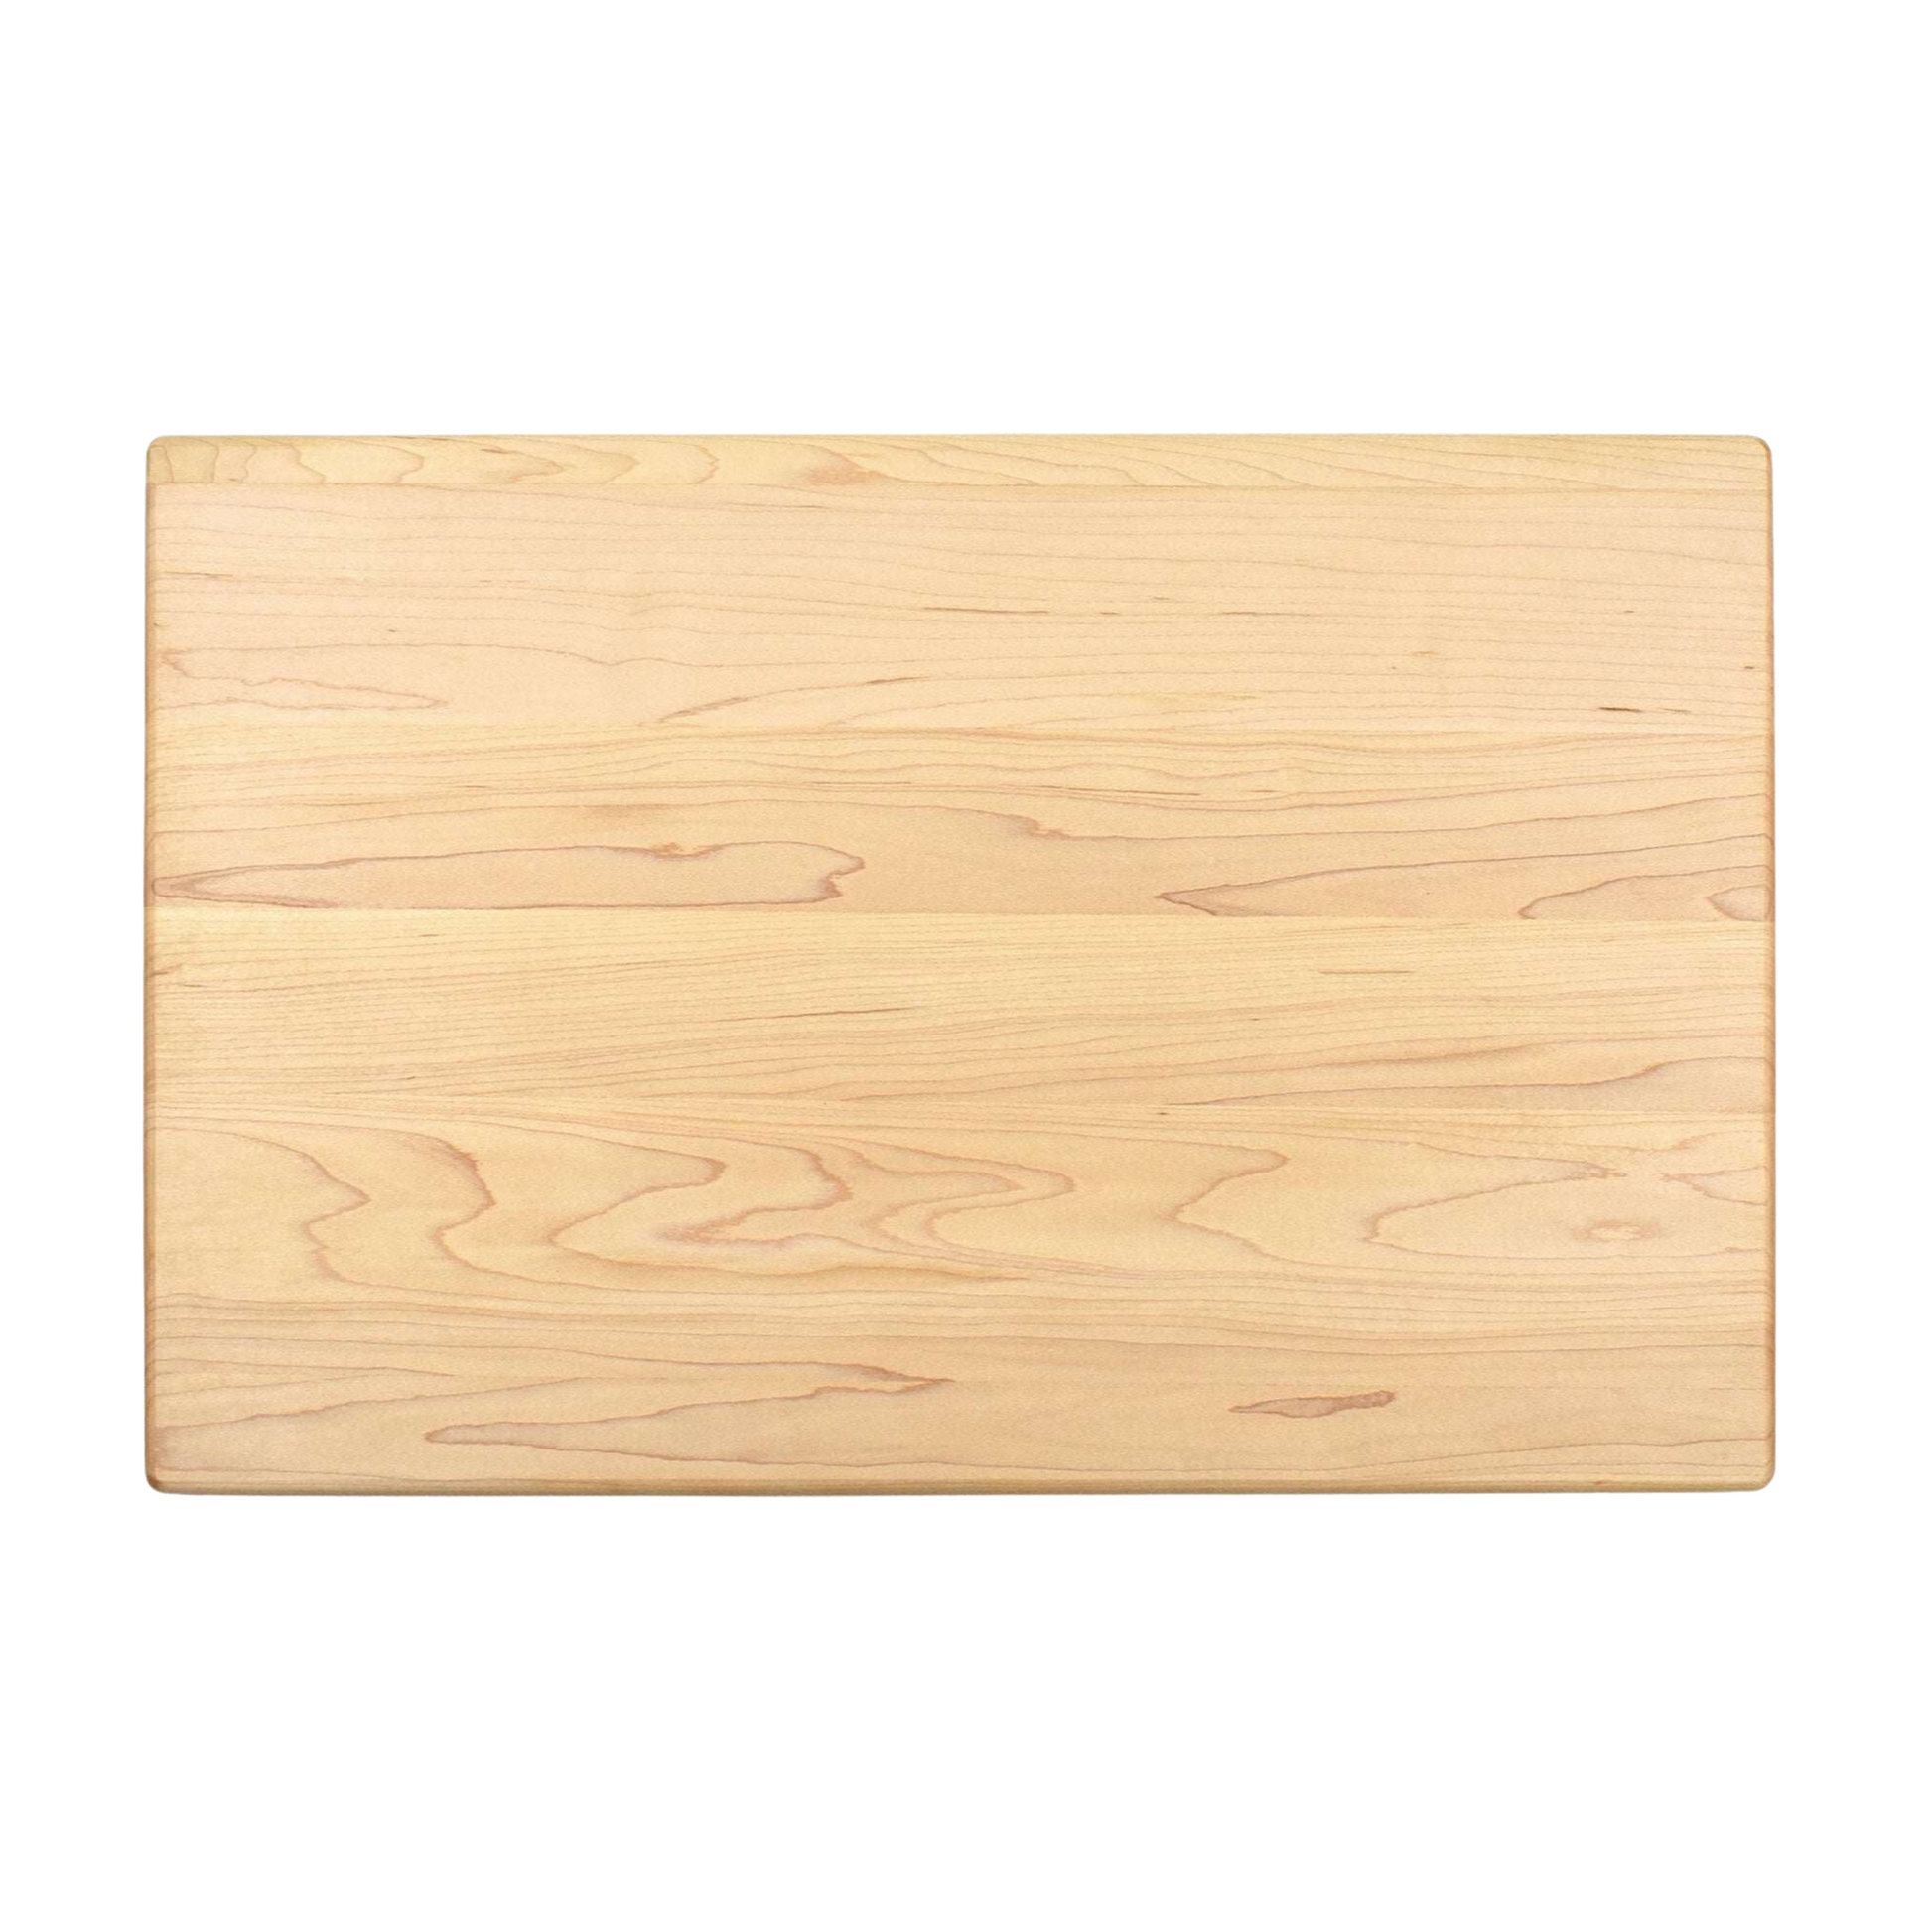 Custom Garden Treasures Cutting Board - Premium Cutting Boards from Hipster Lasers - Just $90! Shop now at Hipster Lasers